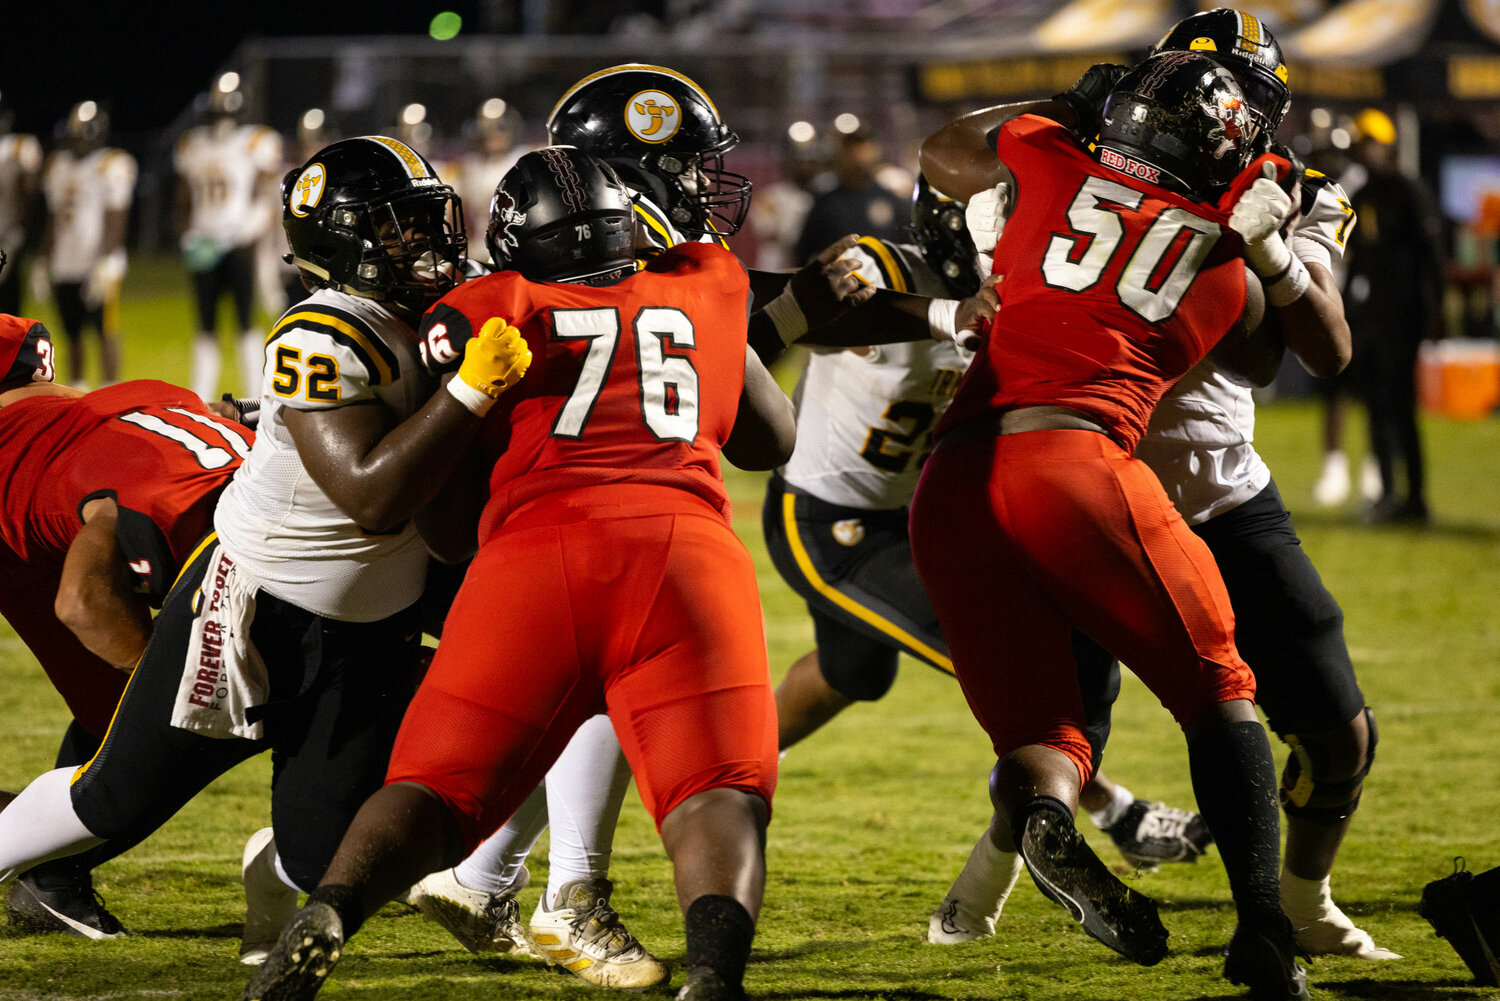 Hartsville defenders try to tackle Yellow Jackets running back Jaden Allen-Hendrix as he sneaks the ball behind his offensive line in the third quarter.